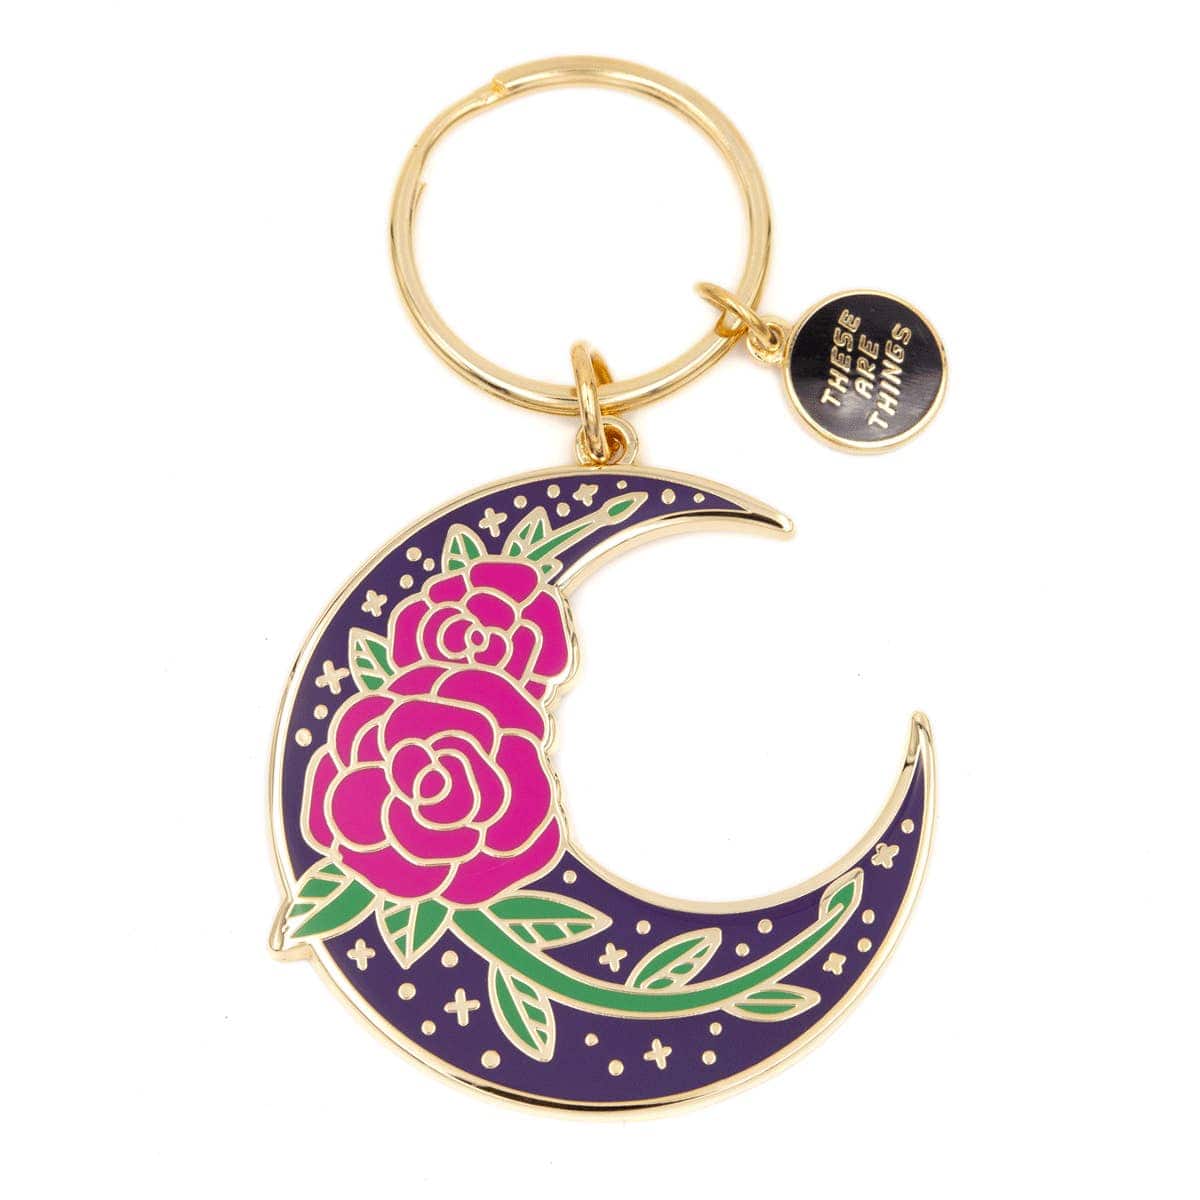 These are Things Rose Moon Enamel Keychain